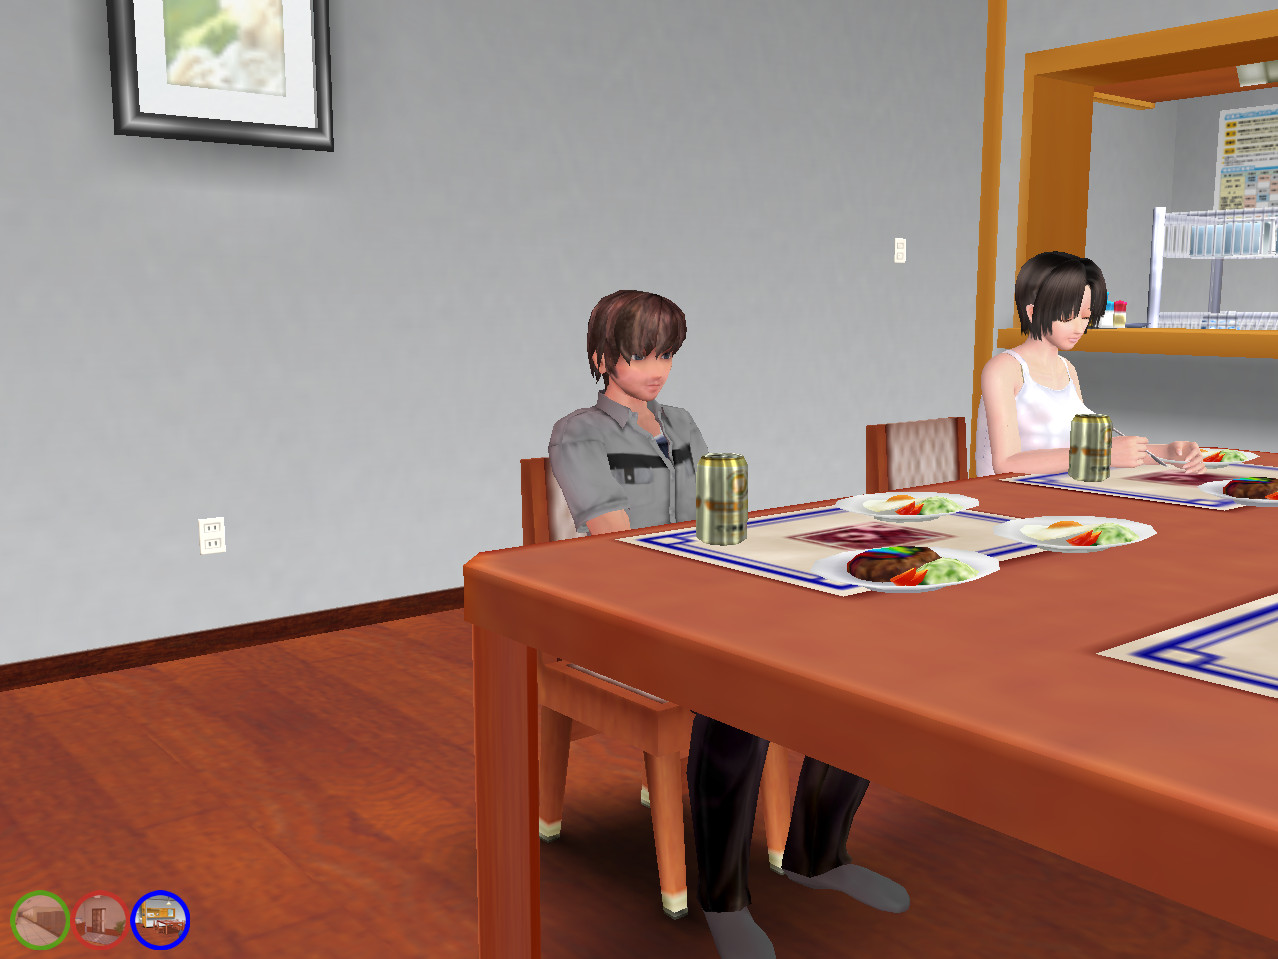 Protagonist sitting at the table with an artificial girl, looking bored